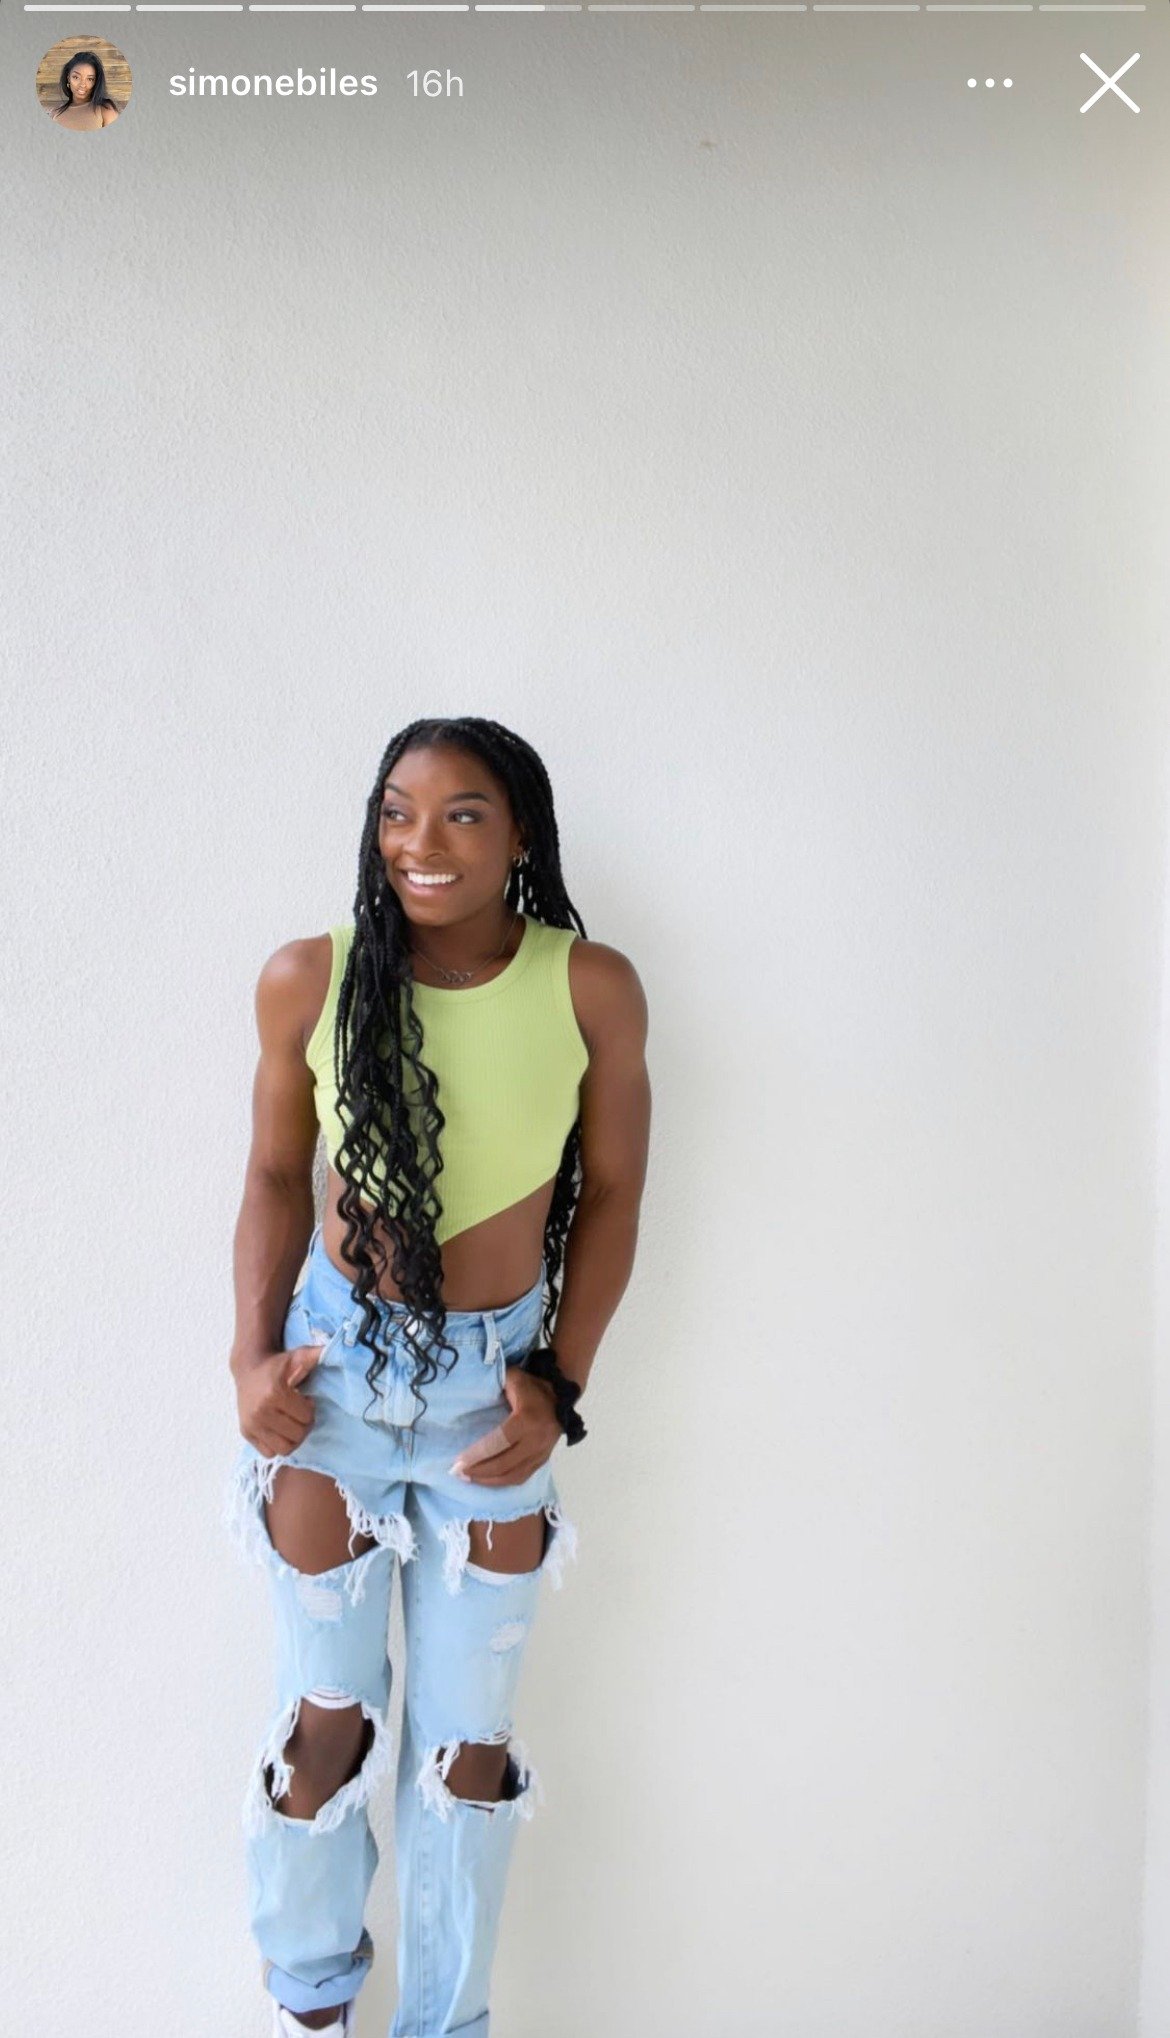 Simone Biles shows off her chiseled body in green top and ripped blue jeans. | Photo: Instagram/Simonebiles